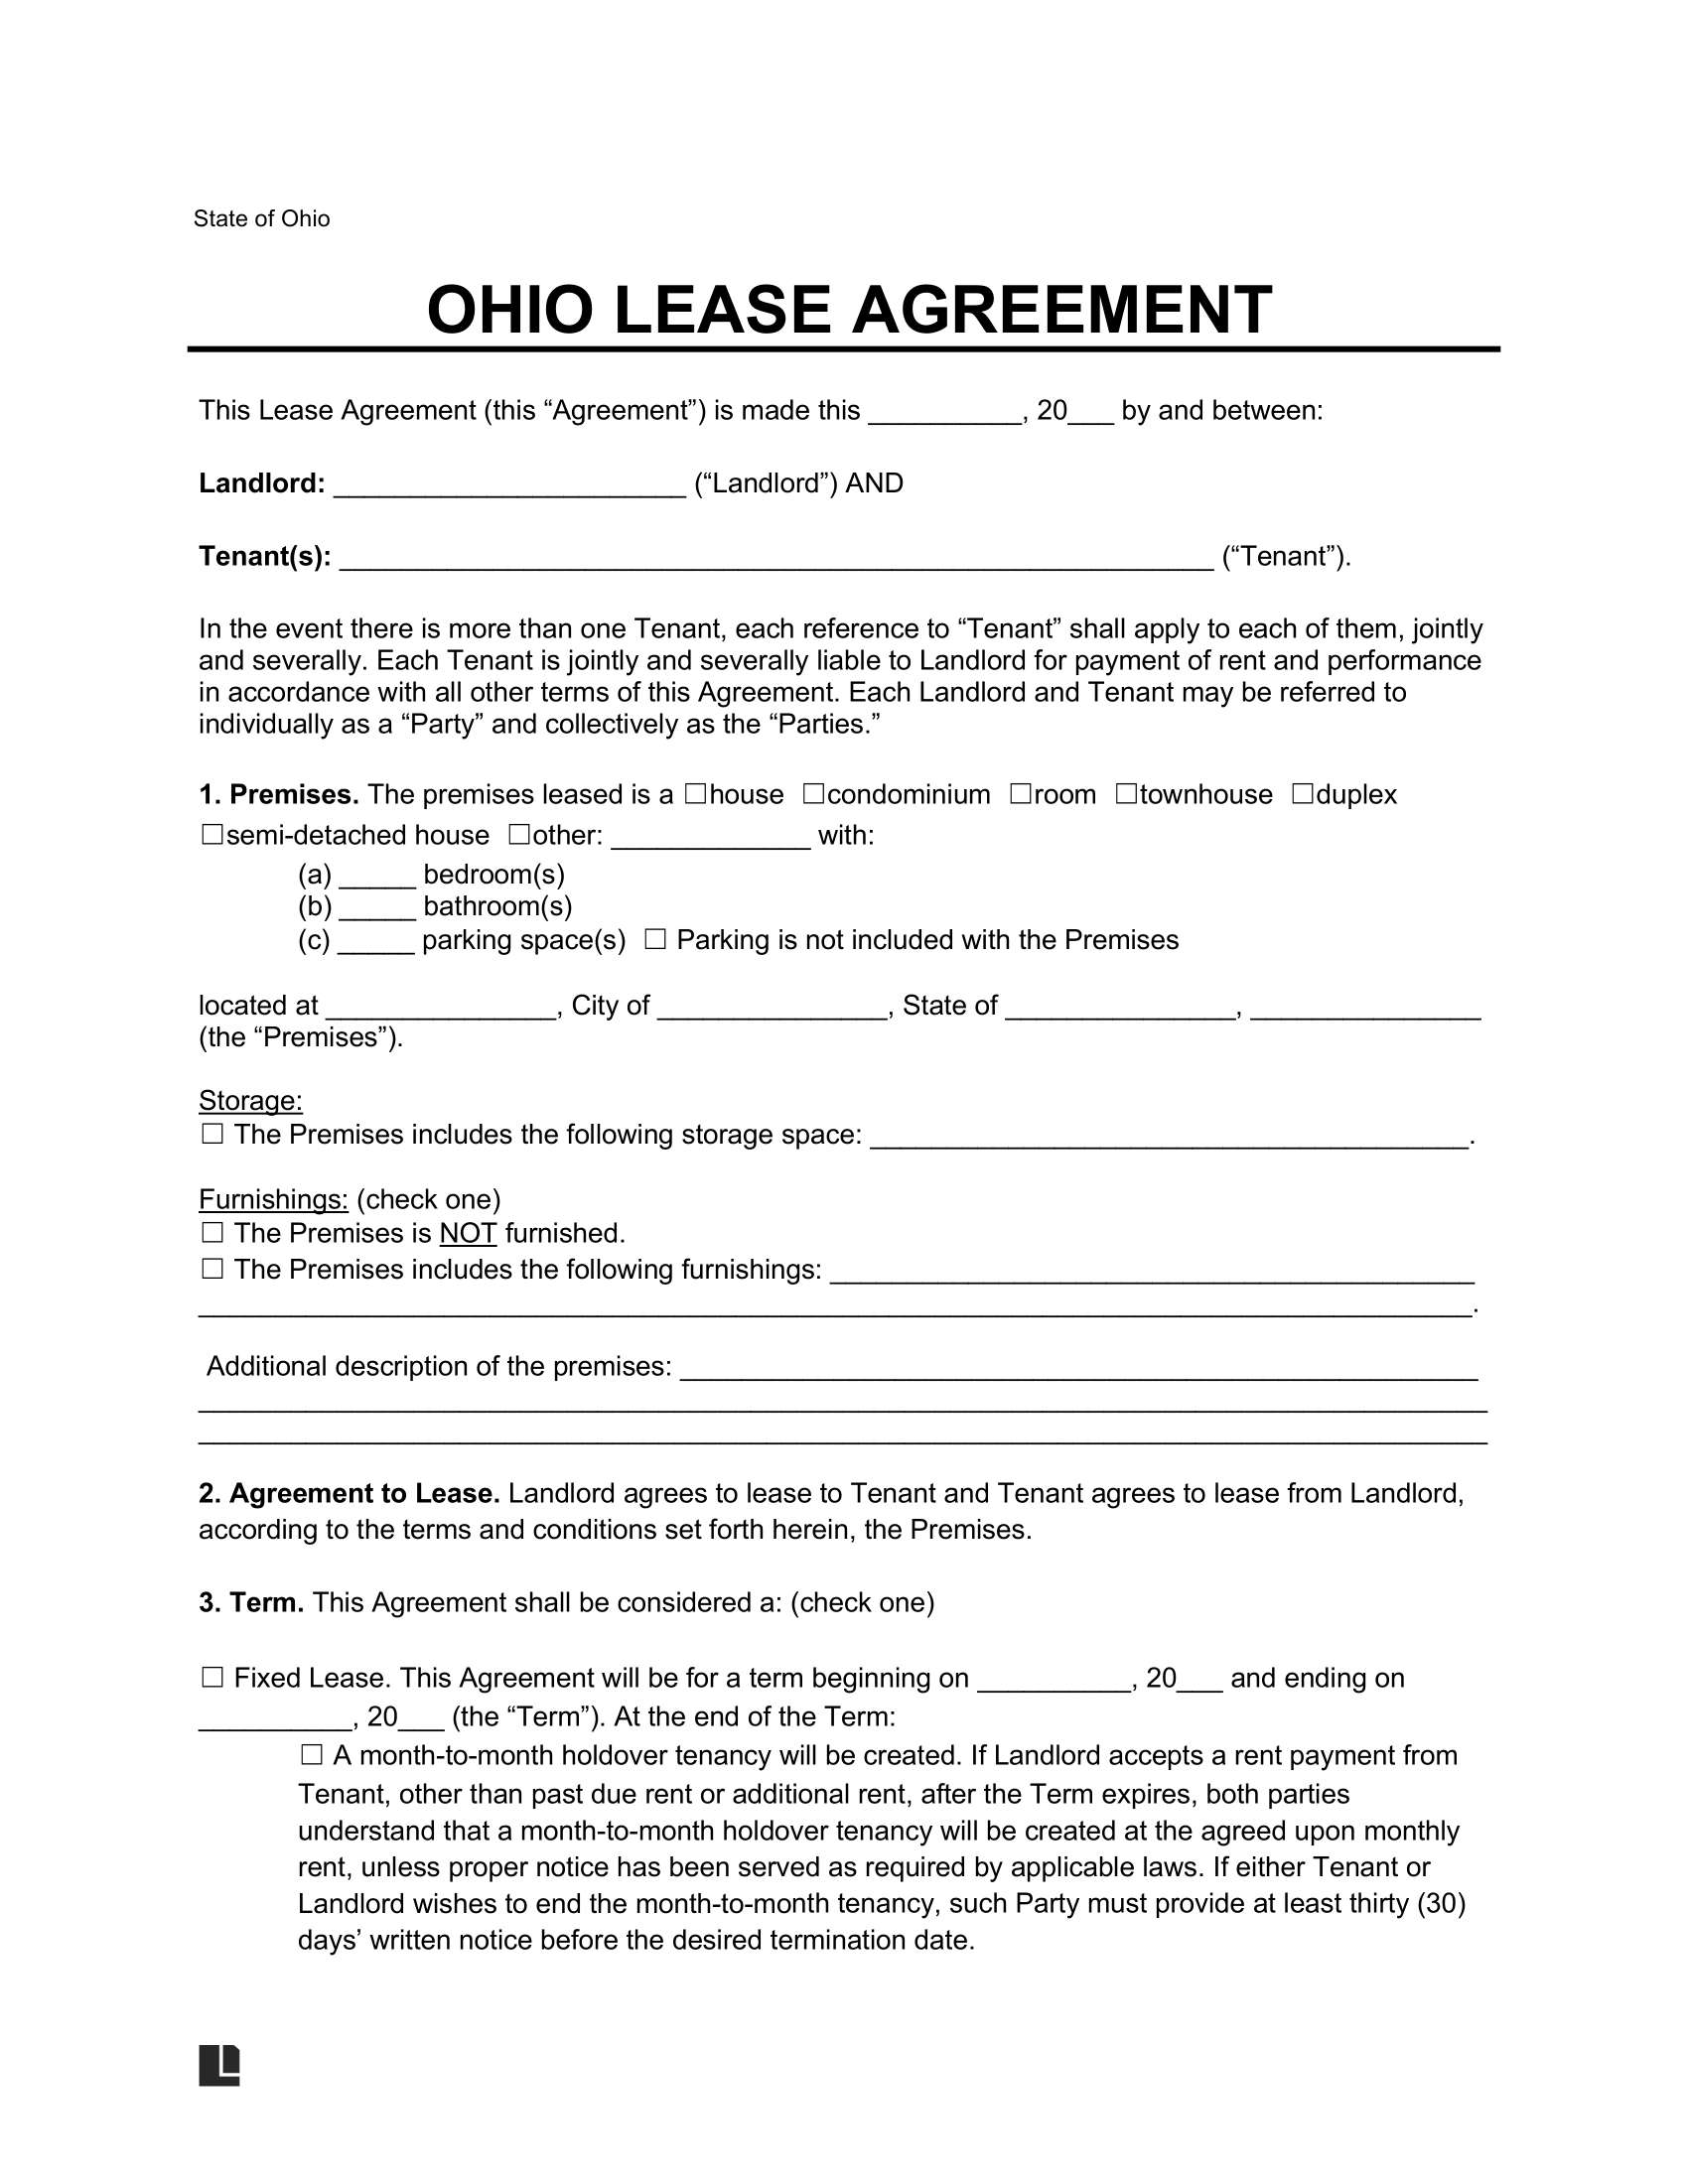 Ohio Standard Residential Lease Agreement